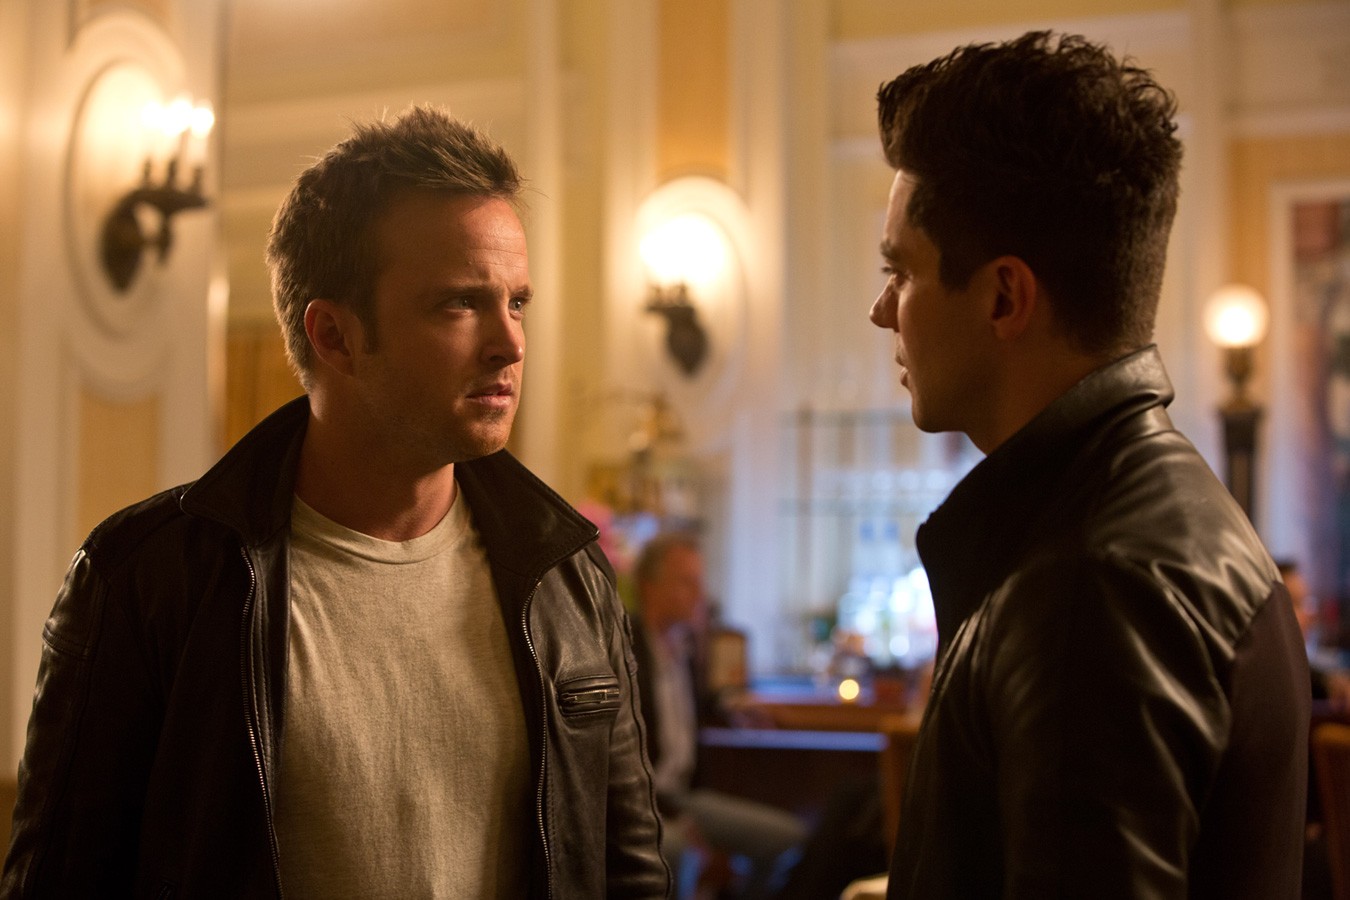 Aaron Paul stars as Tobey Marshall and Dominic Cooper stars as Dino Brewster in Walt Disney Pictures' Need for Speed (2014). Photo credit by Melinda Sue Gordon.